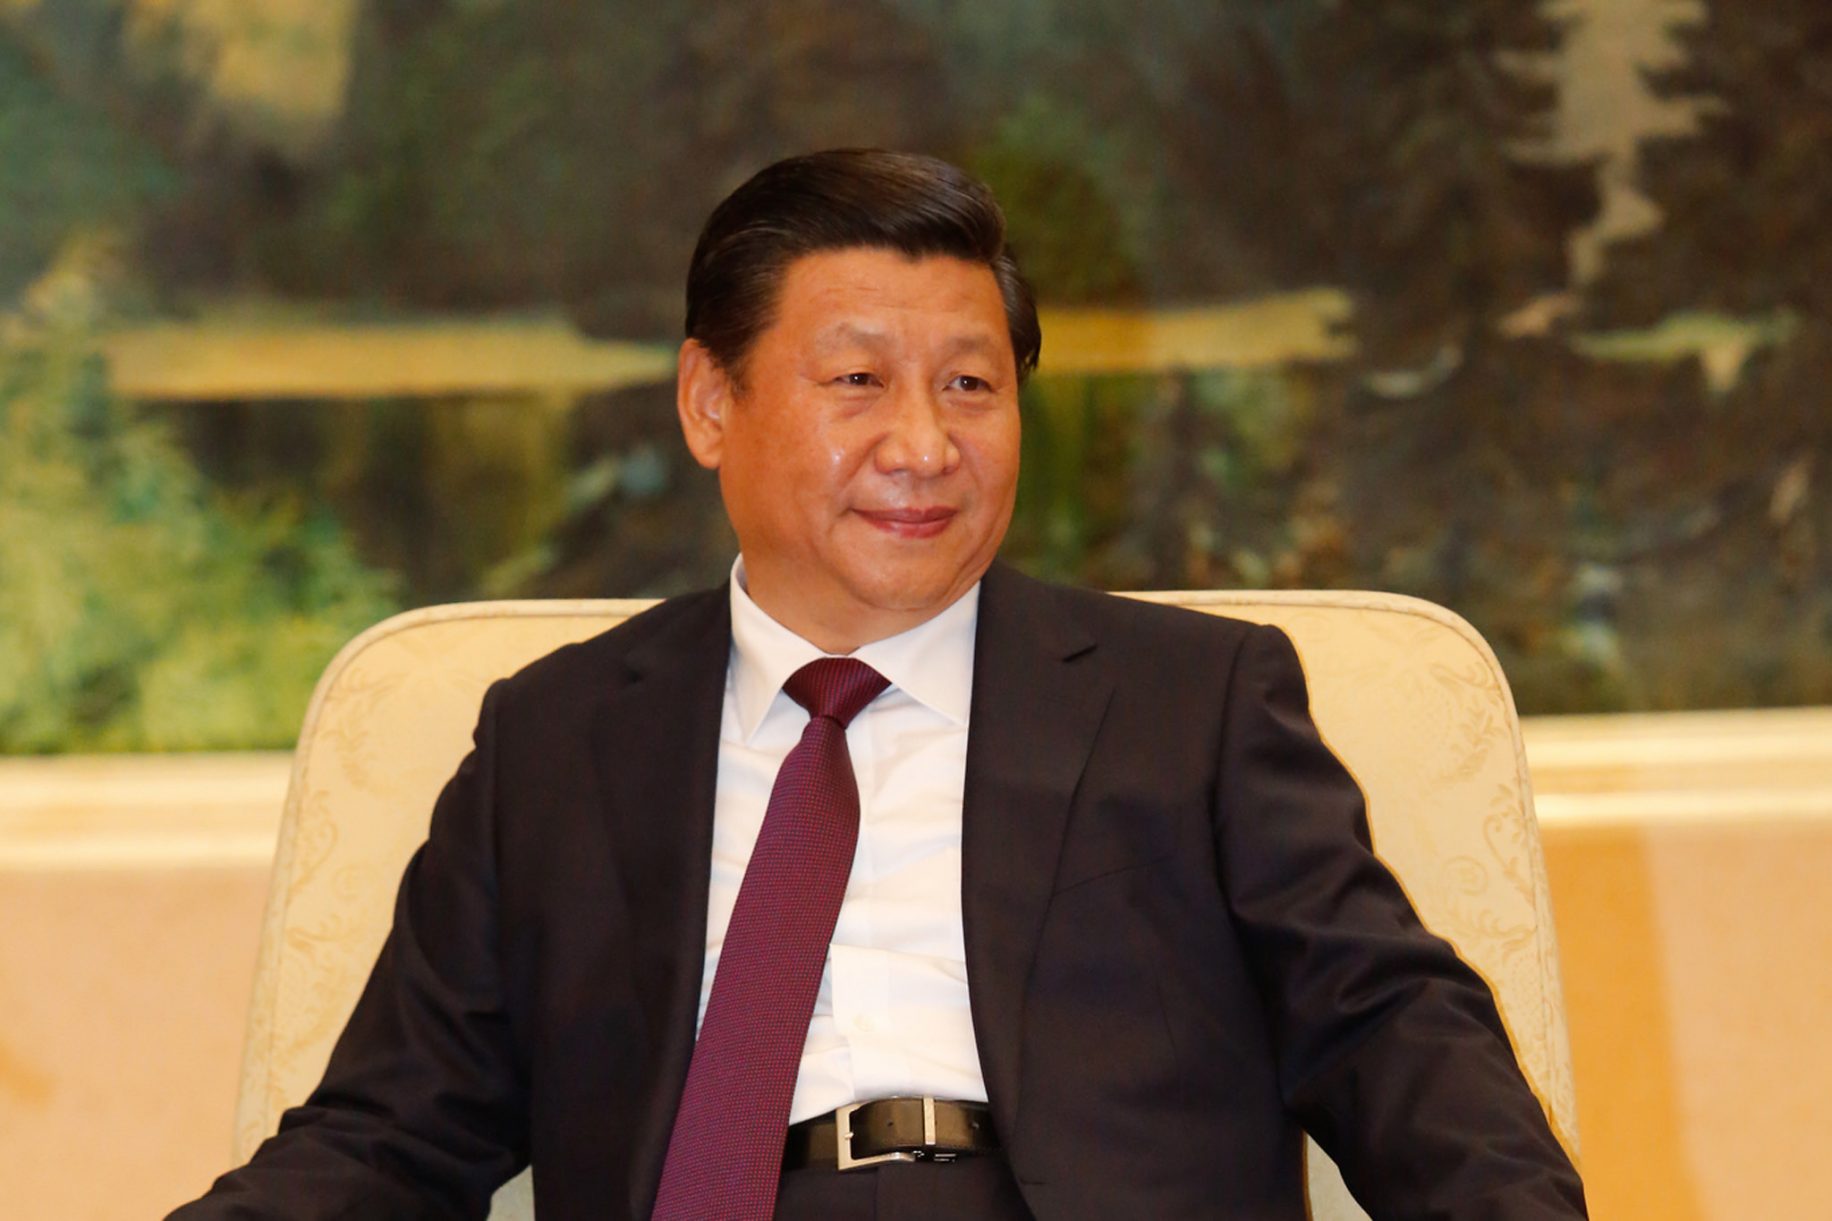 Peak Xi: In a downturn is China’s leader the man for the job?